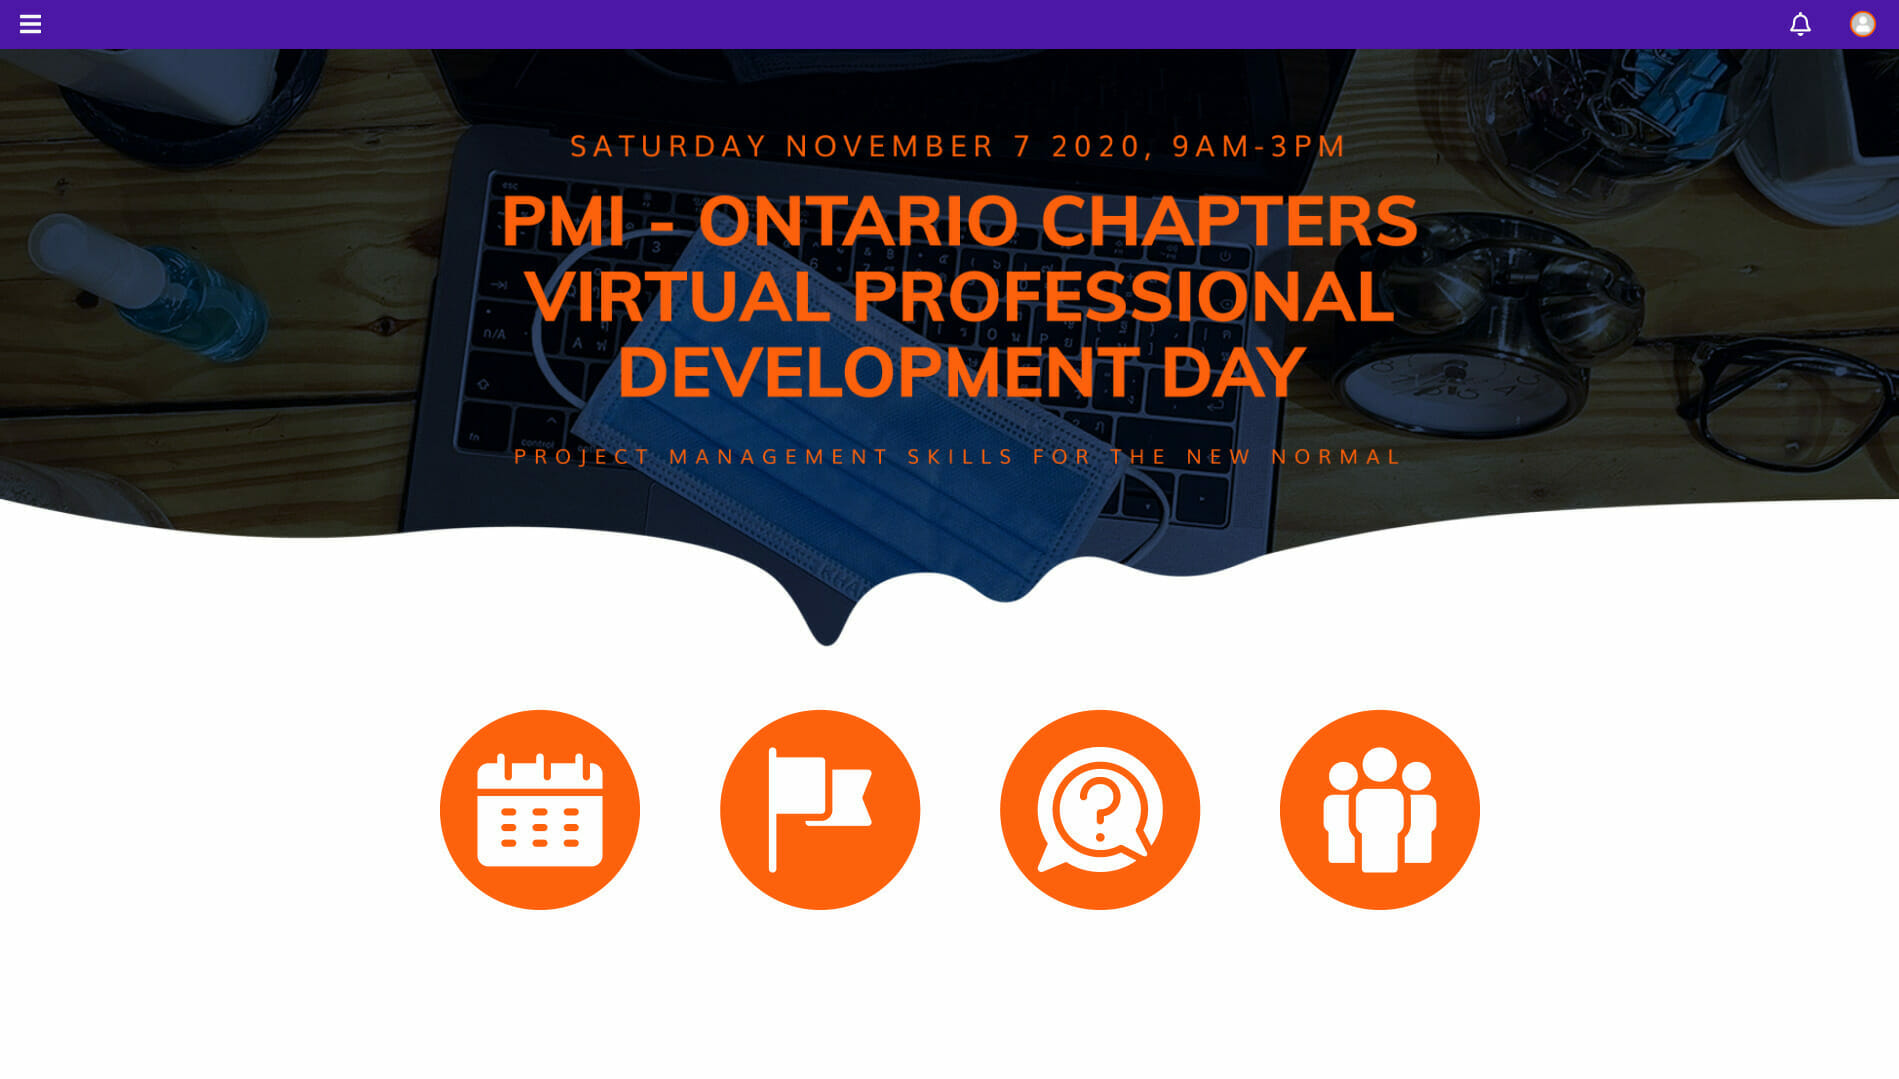 A screenshot of PMI - Ontario Chapters' virtual event space, featuring a creative hero background image and playful widget icons.